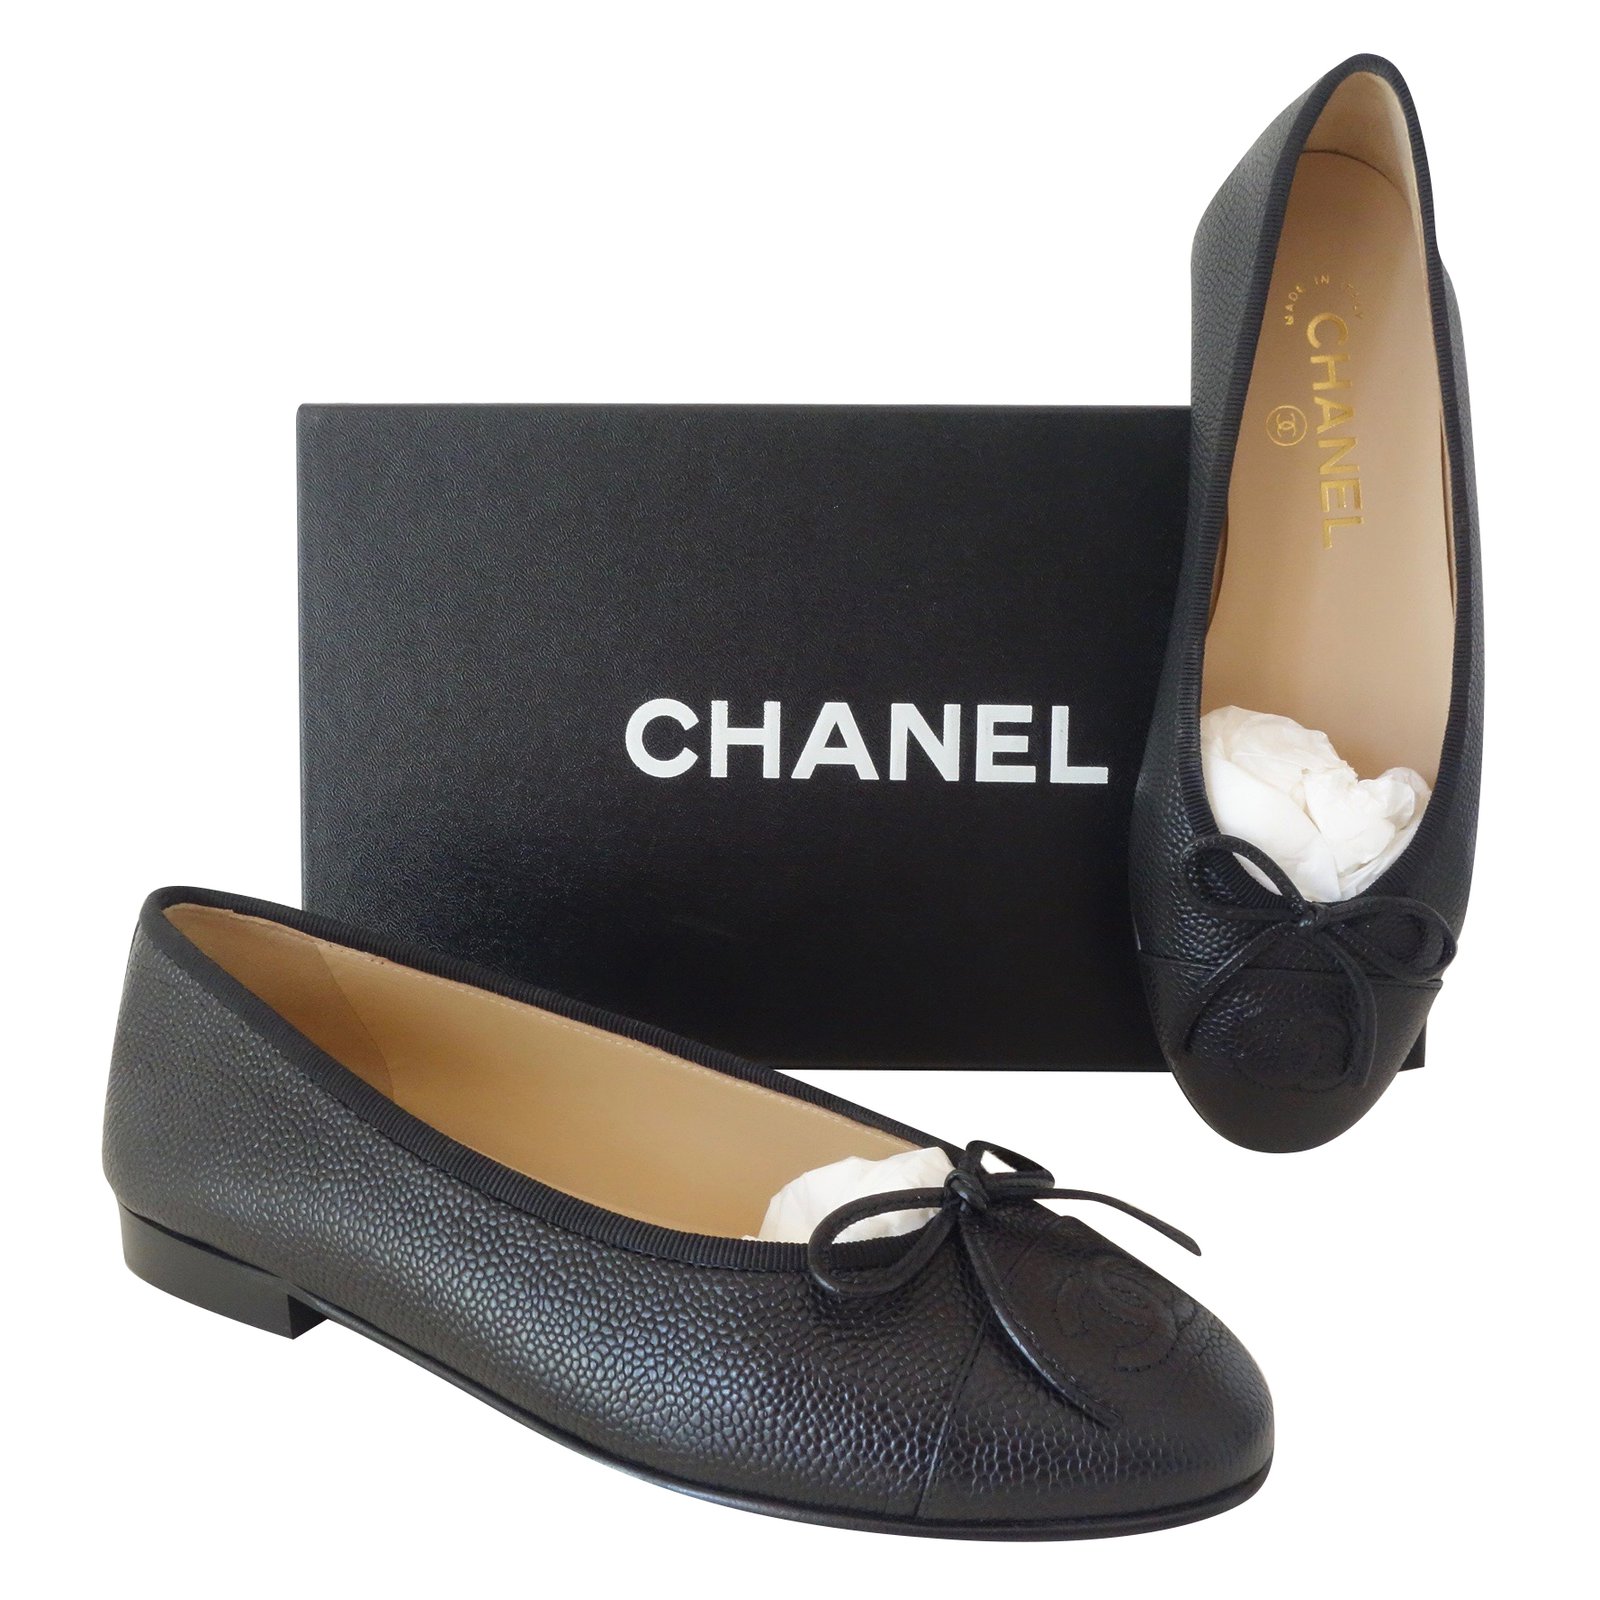 Leather ballet flats Chanel Black size 39.5 EU in Leather - 33731824